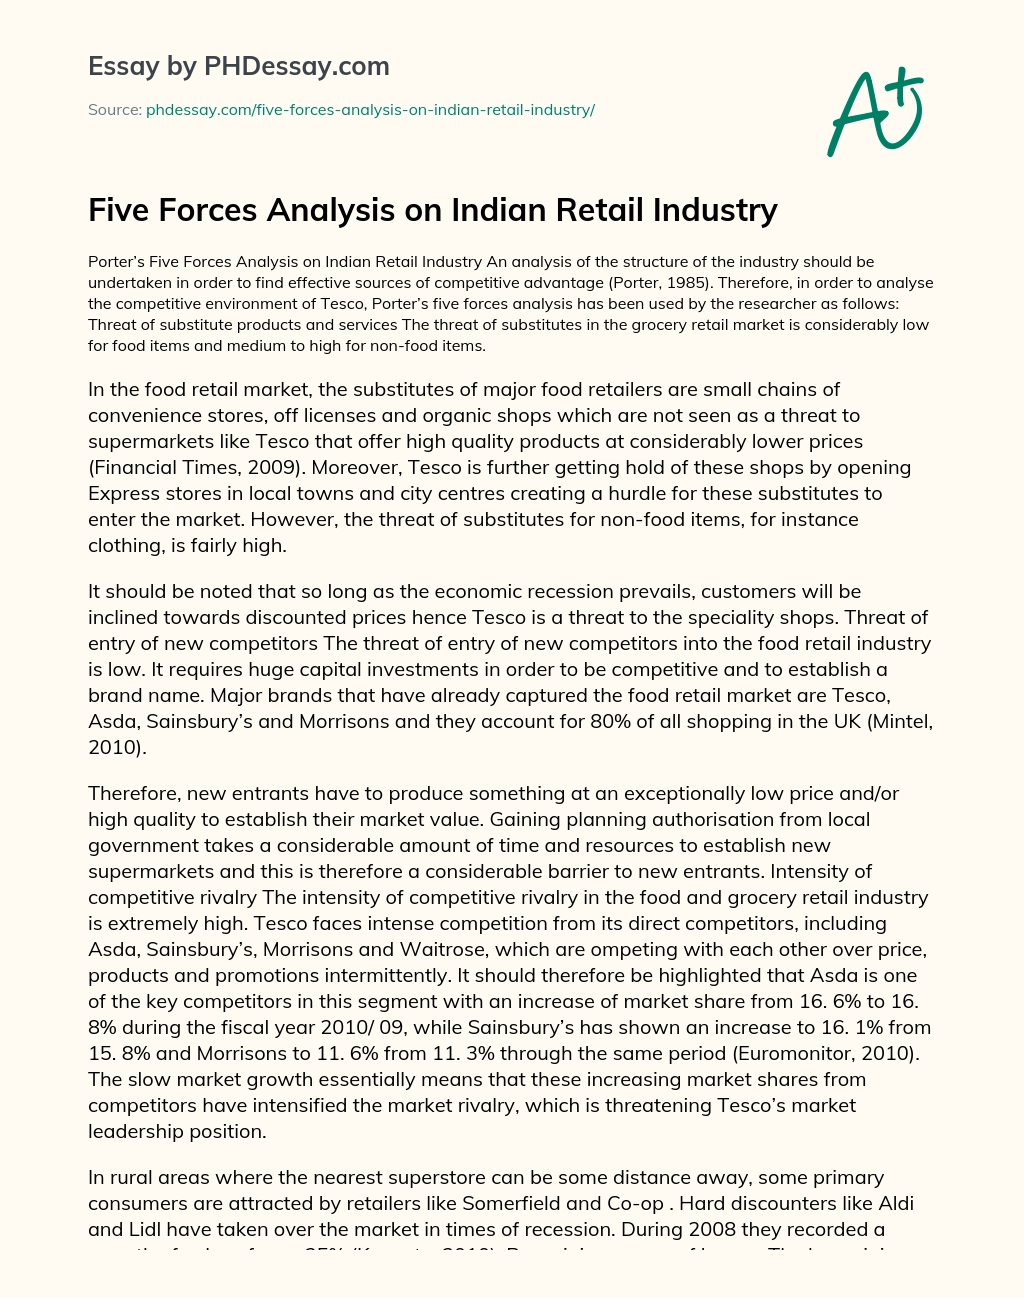 Five Forces Analysis on Indian Retail Industry essay